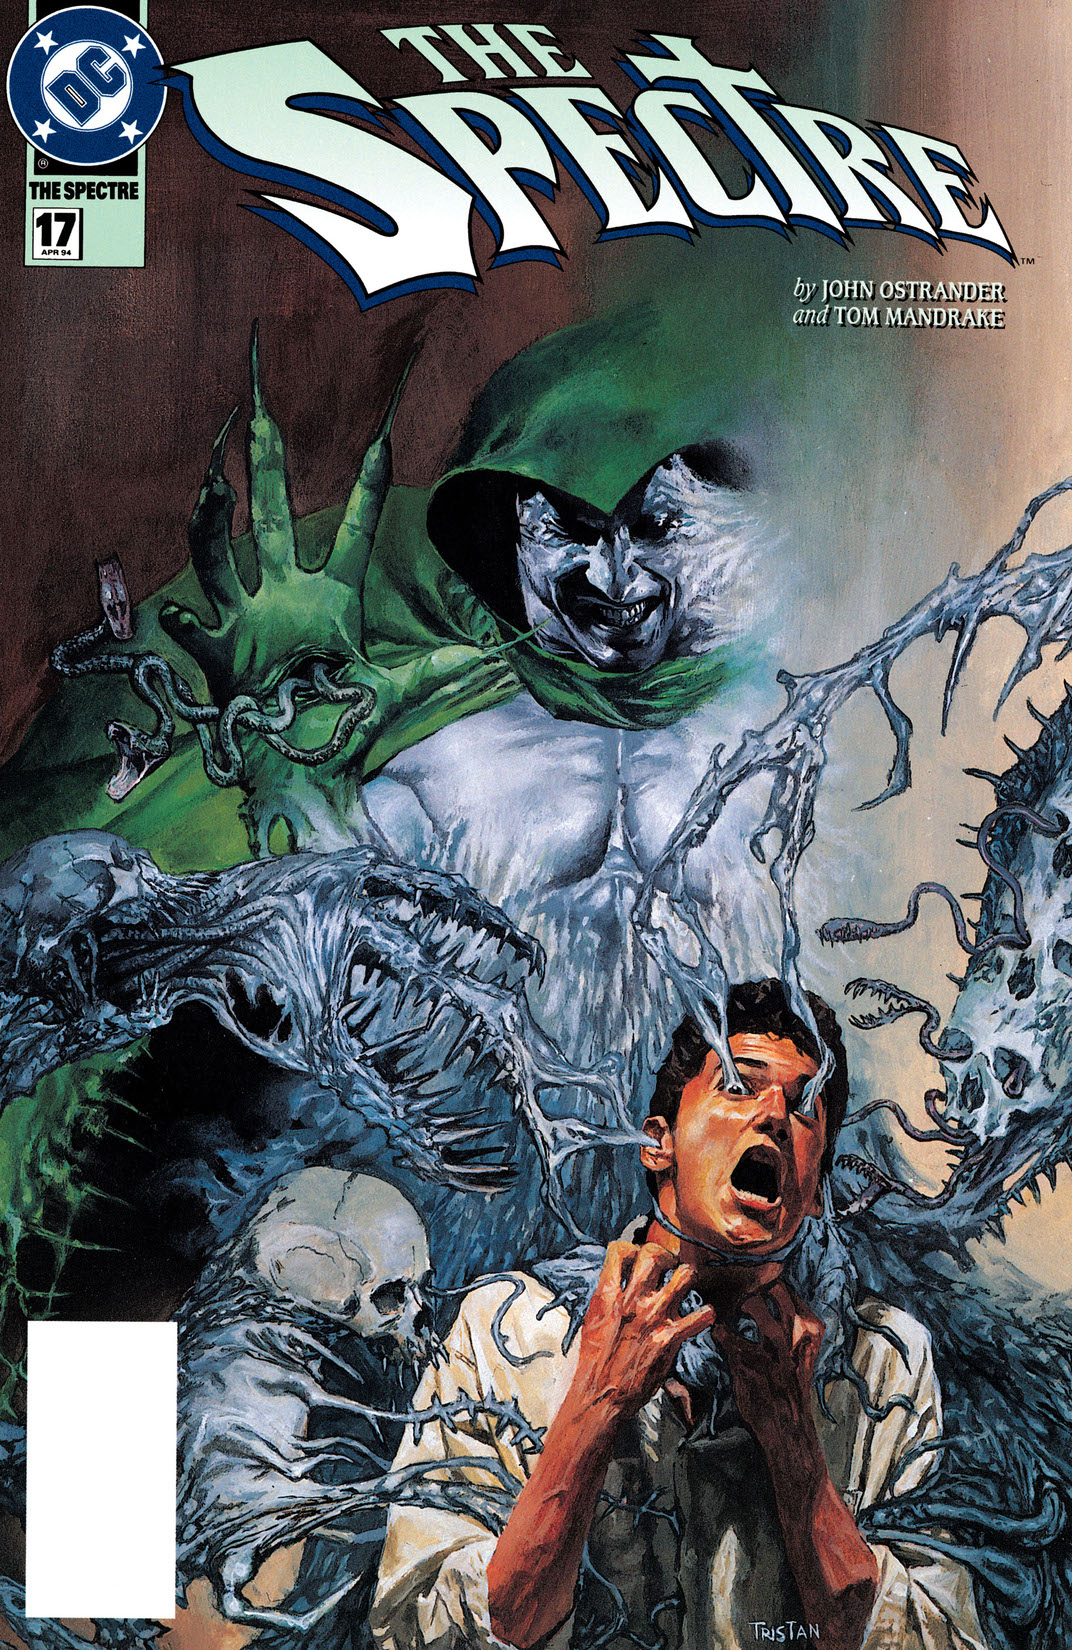 The Spectre (1992-) #17 preview images